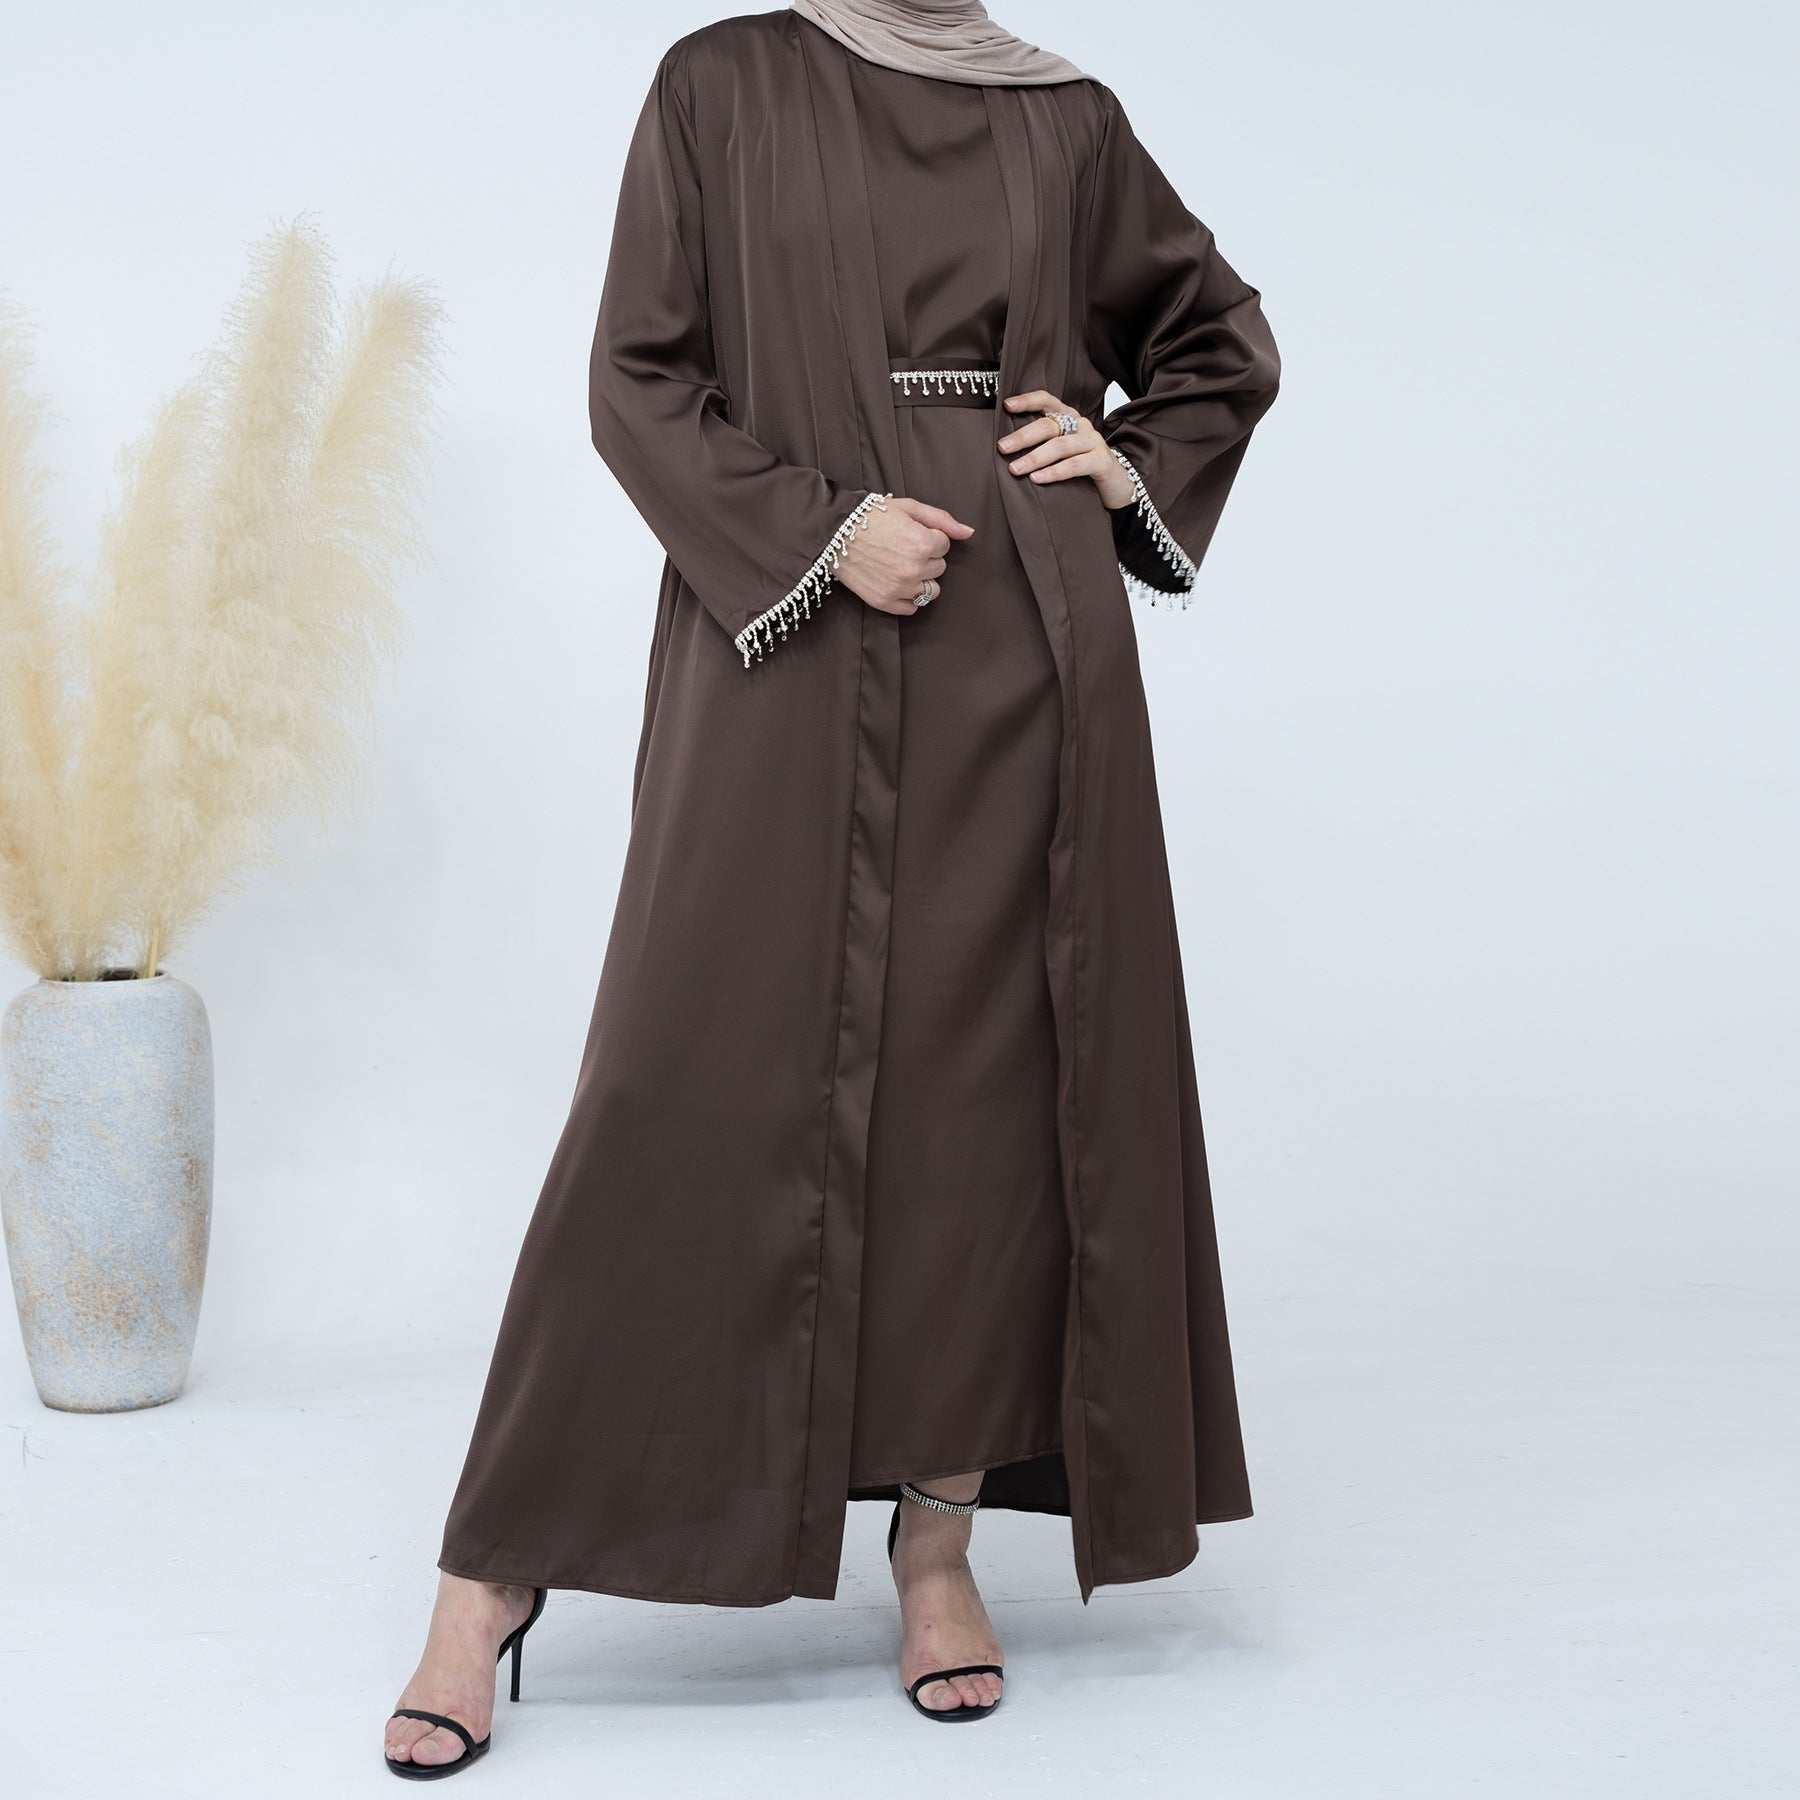 Introducing the Malika Abaya in Coffee, available at Hikmah Boutique. Crafted meticulously with luxurious Satin silk material, this exquisite ensemble promises unparalleled comfort and opulence. The Malika Abaya in Coffee is a sophisticated addition to your modest clothing wardrobe, offering timeless elegance.